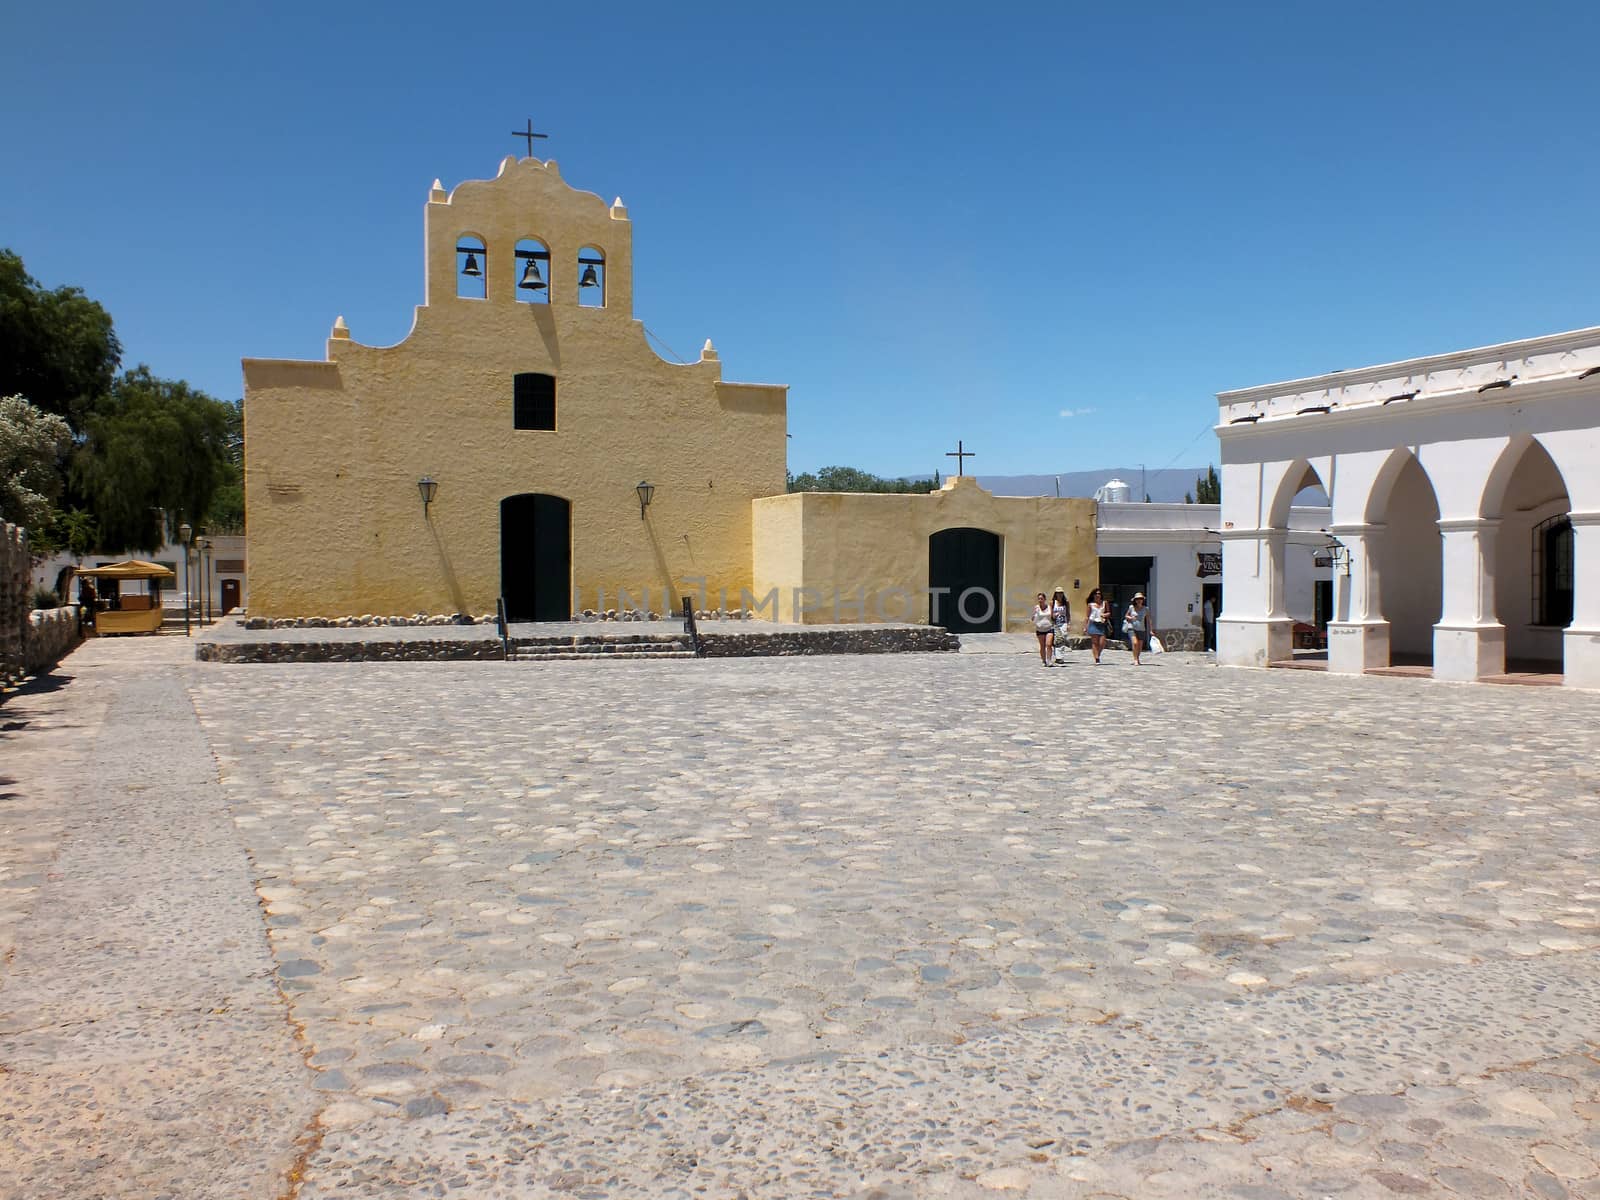 The Church of San Jose de Cachi is a recognised National Historical Monument, which was built in the sixteenth century. However the current facade dates from 1947.